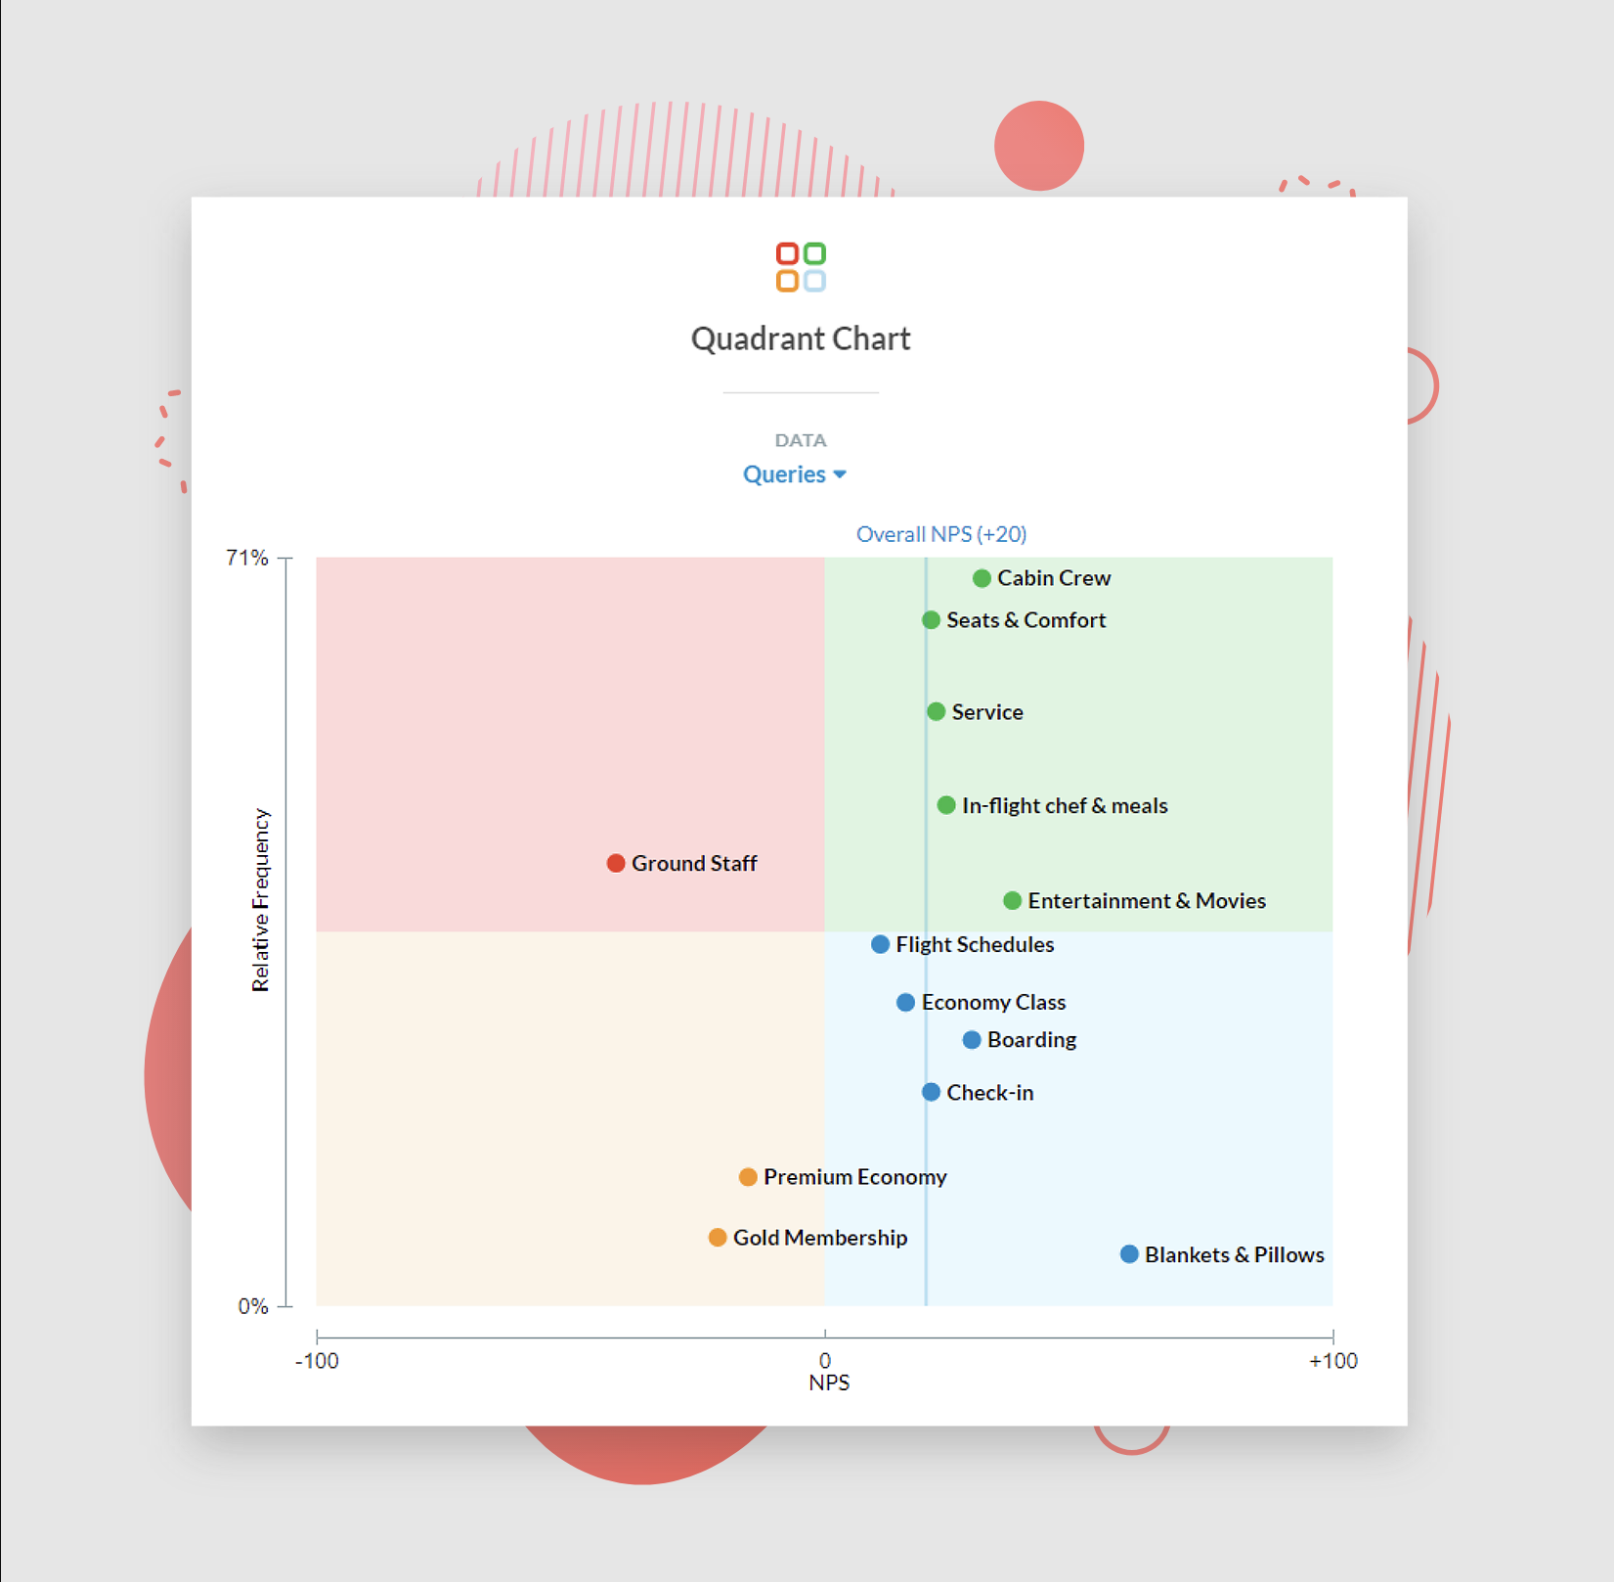 Not sure what issues need prioritizing for the greatest ROI? The Kapiche Quadrant Chart instantly pinpoints how different themes or customer segments are performing, so you can prioritize initiatives accordingly.